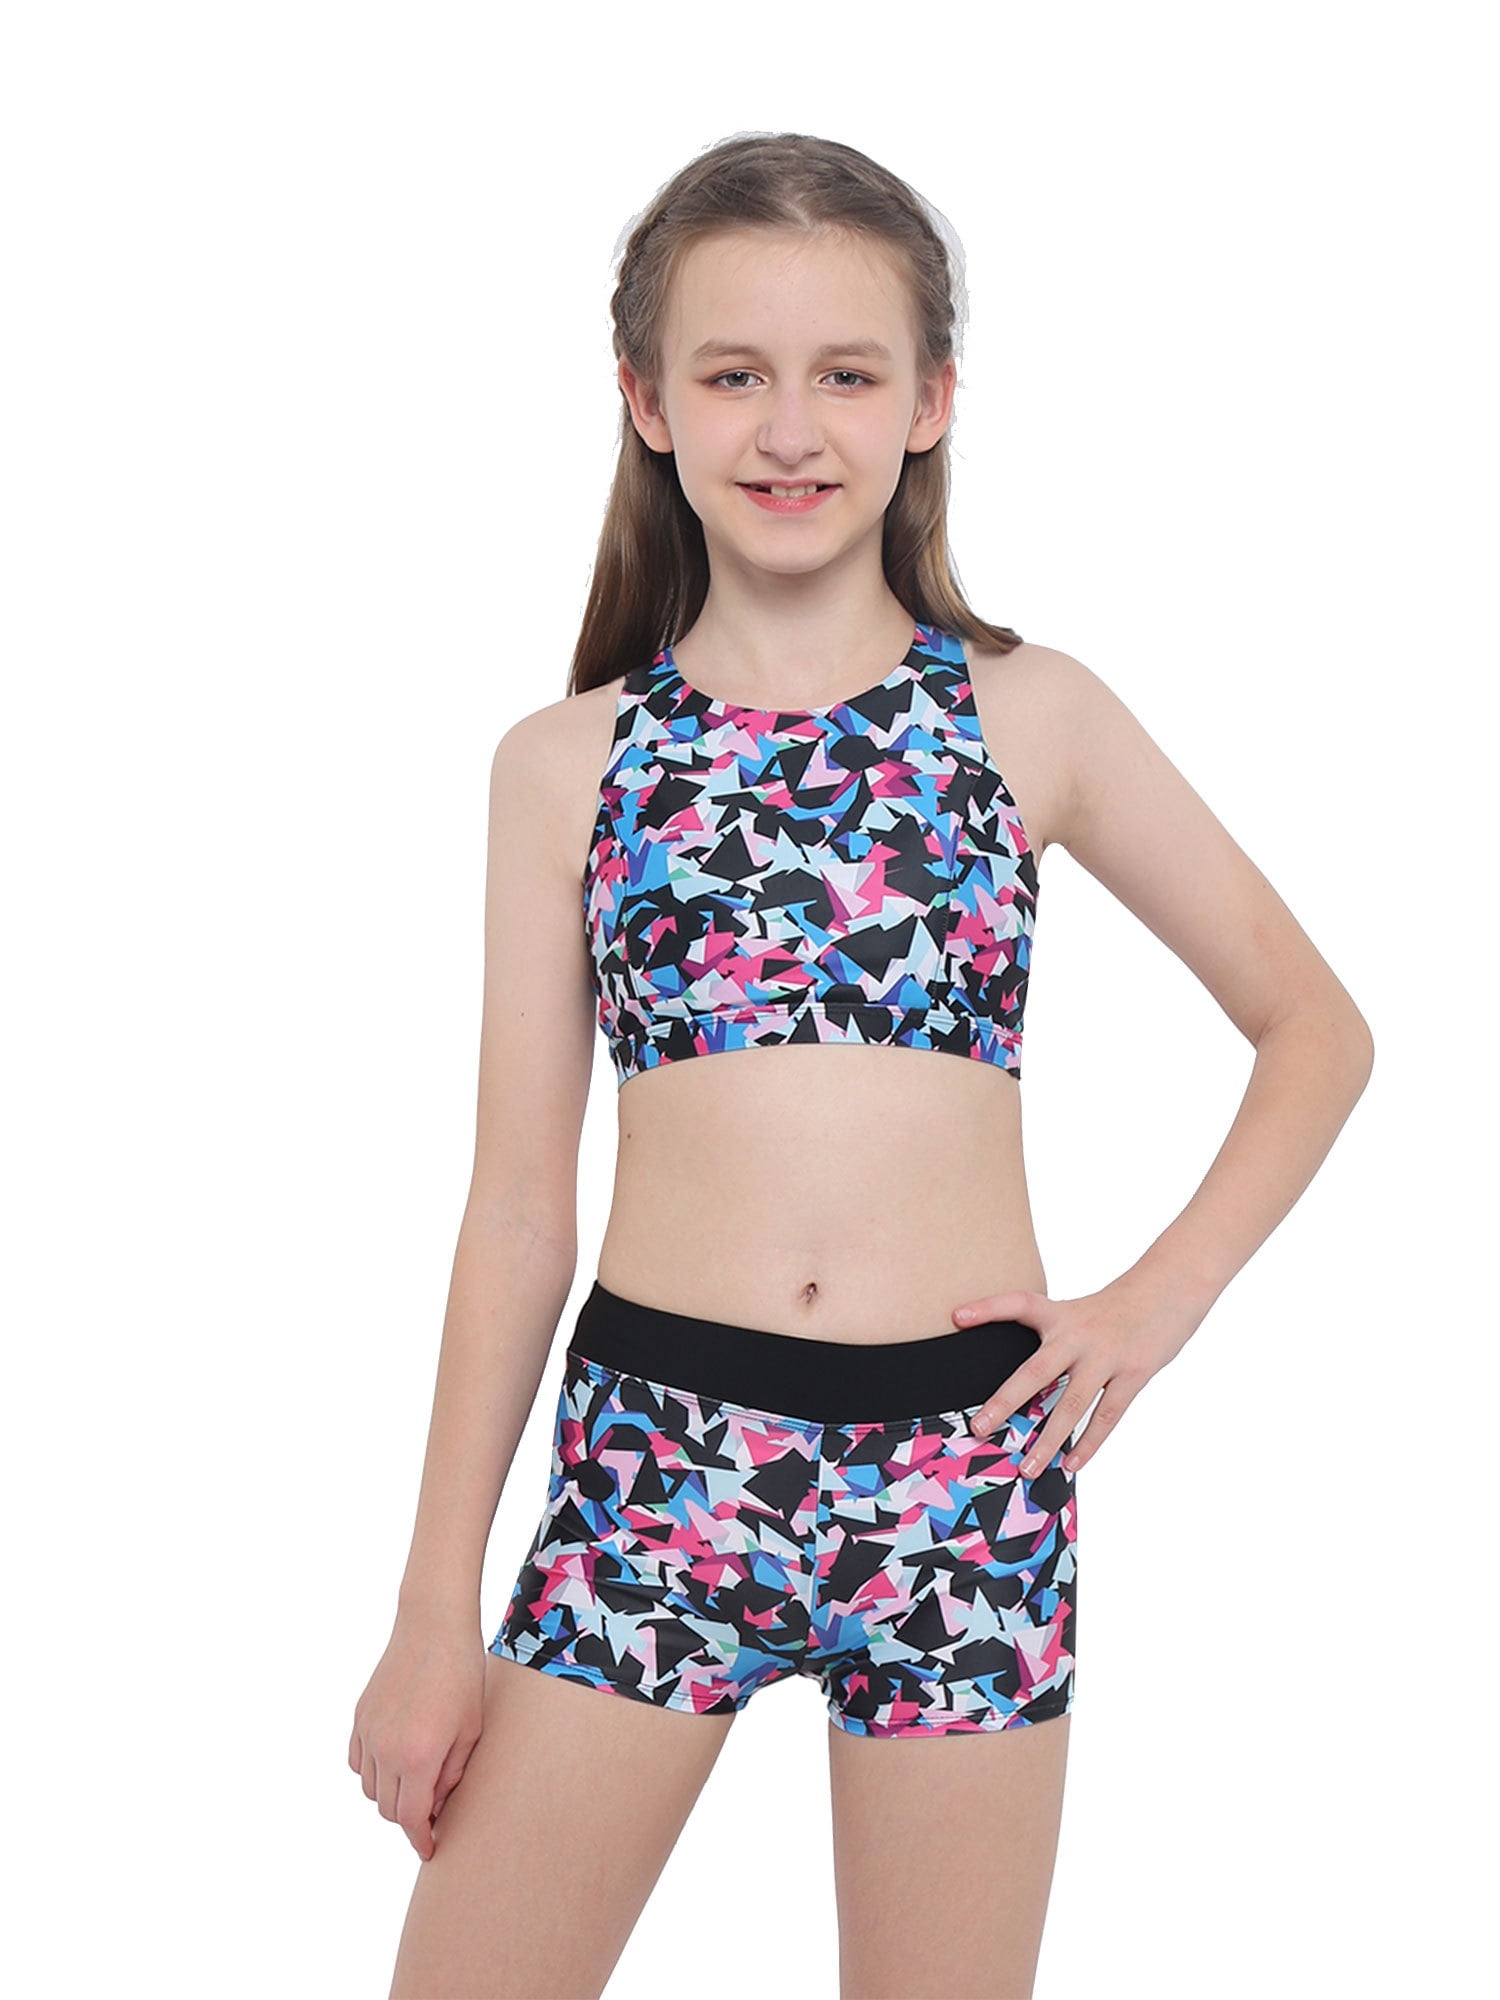 iiniim Girls' Kids 2-Piece Active Set Dance Sport Outfits Racer Back Top  and Booty Short Gymnastics Size 4-14 Colorful 12 